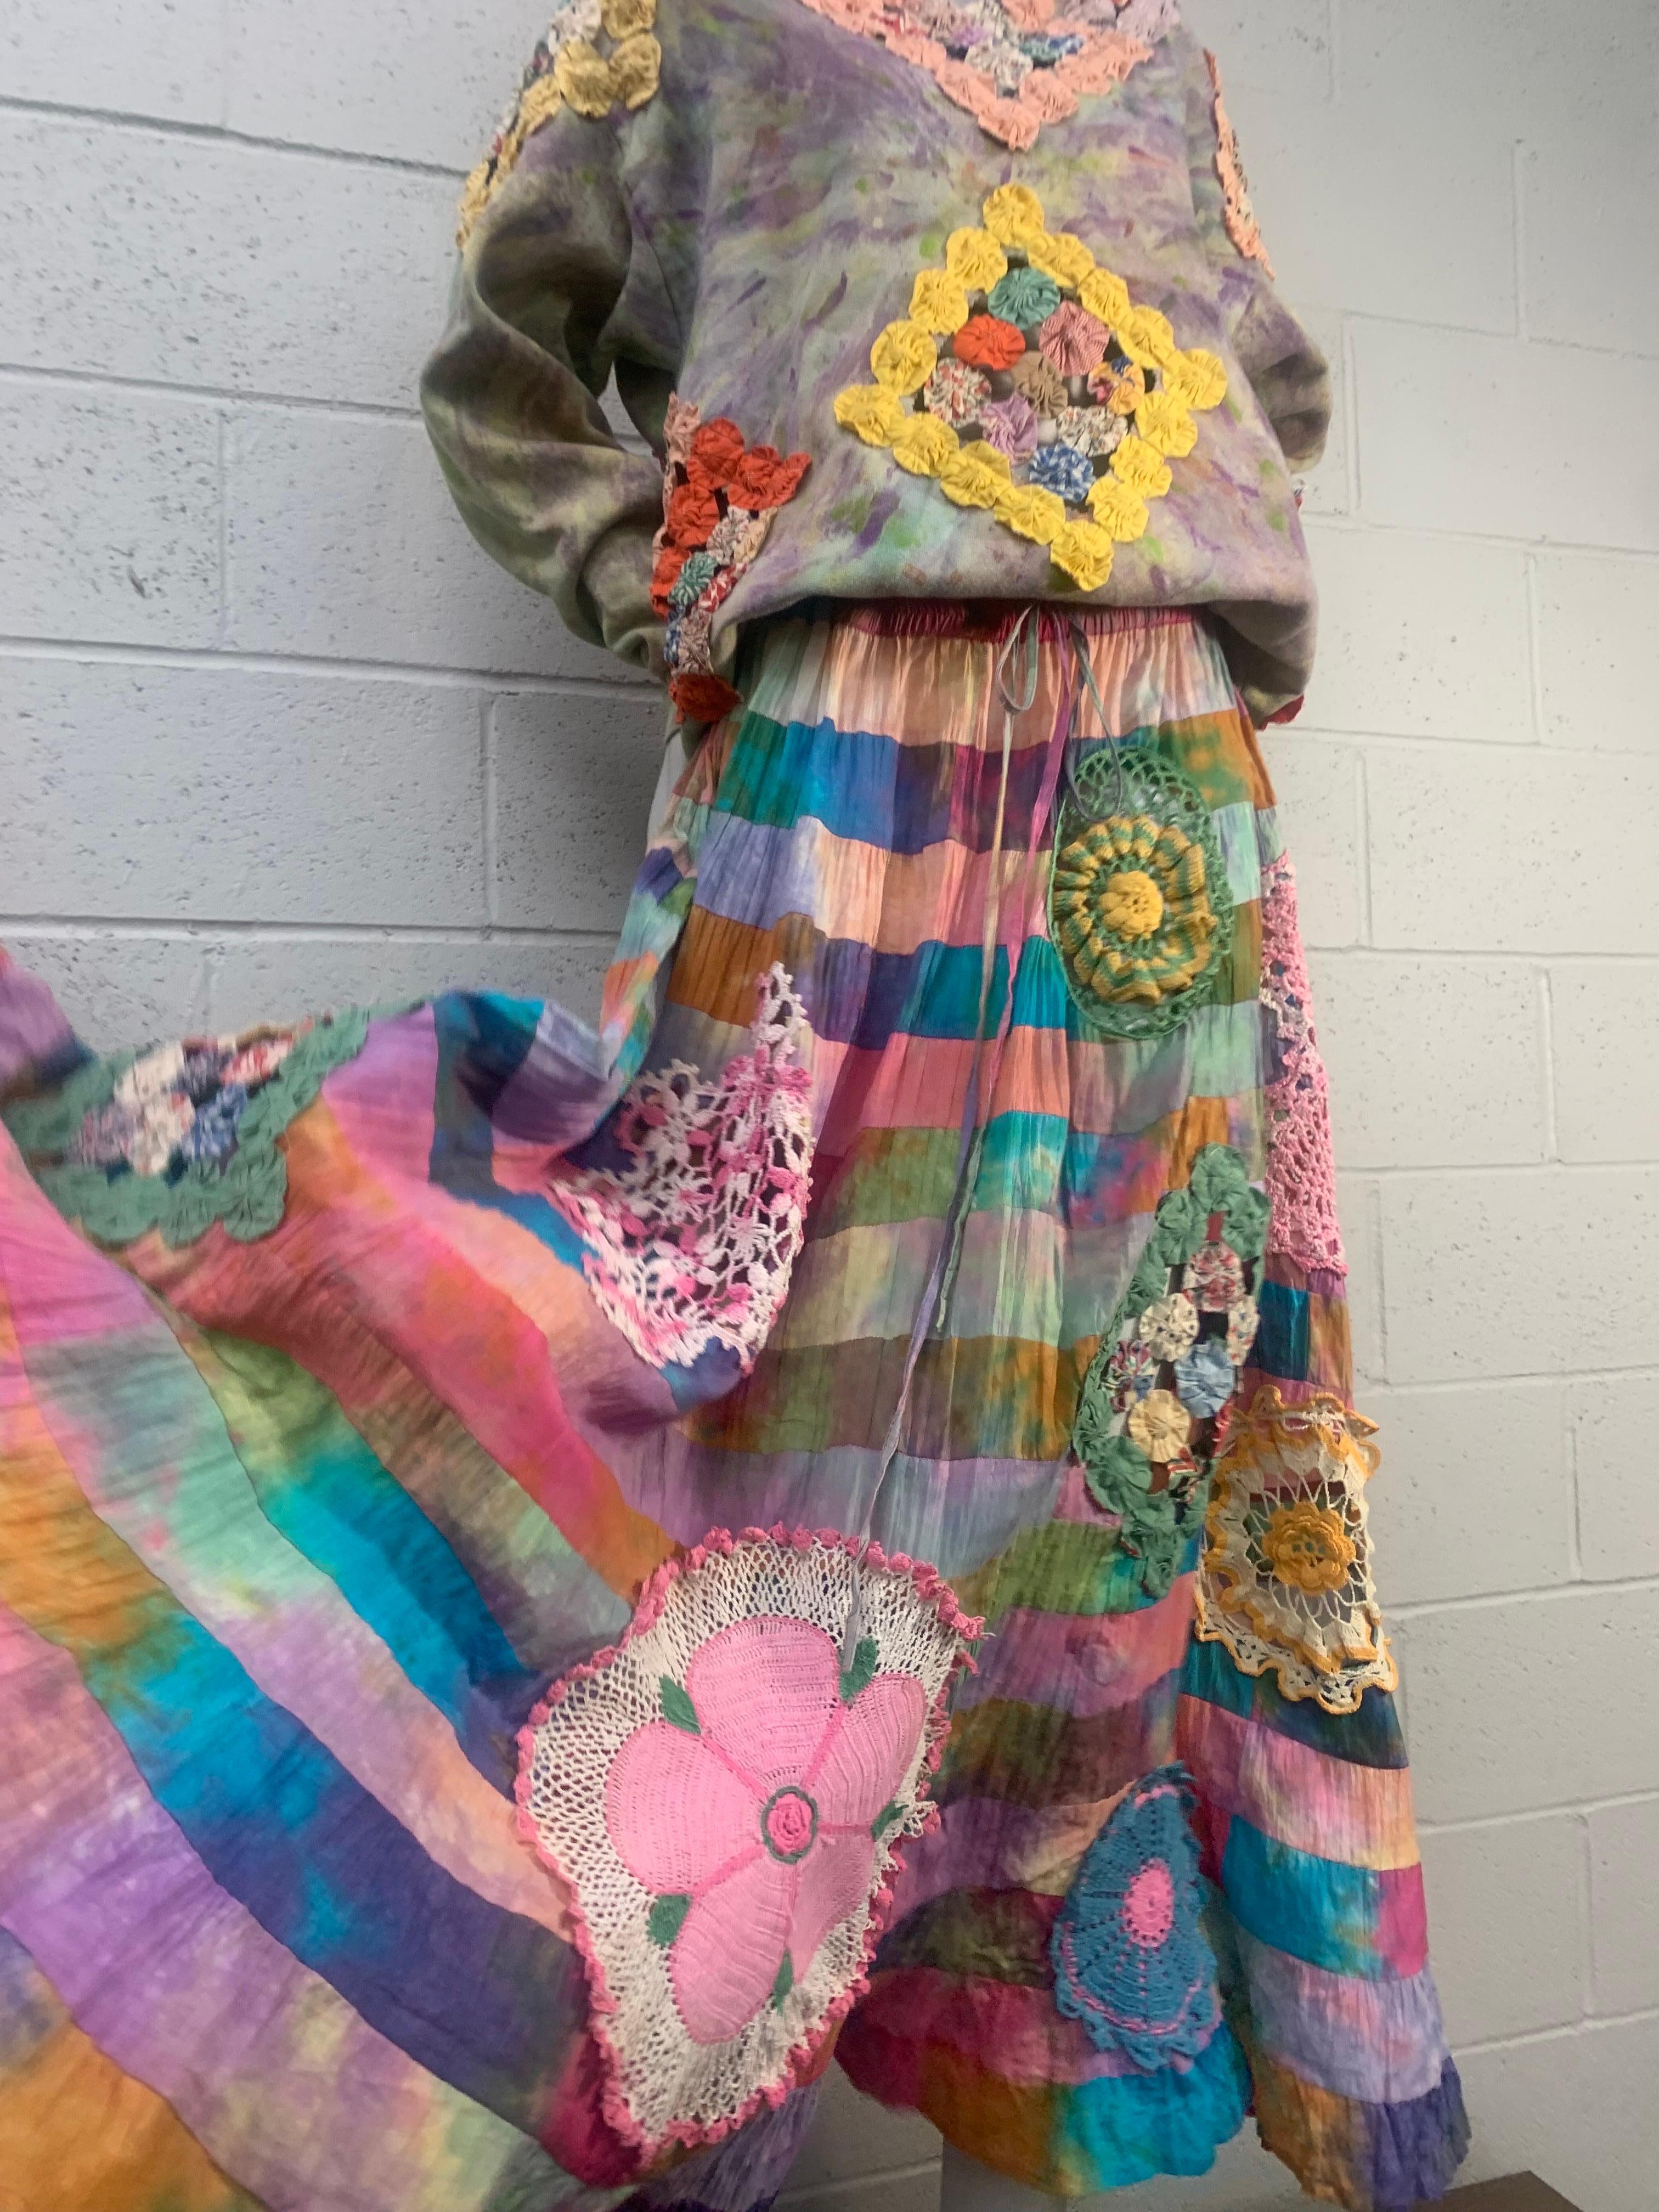 Torso Creations 2-Piece Cotton Tie Dye Patchwork Crochet Quilted Skirt & Pullover Set:  Skirt is a full tiered and gathered patchwork floor-length skirt with colorful crochet inset panels. Top is tie-dyed cotton pullover with yoyo quilt peek-a-boo